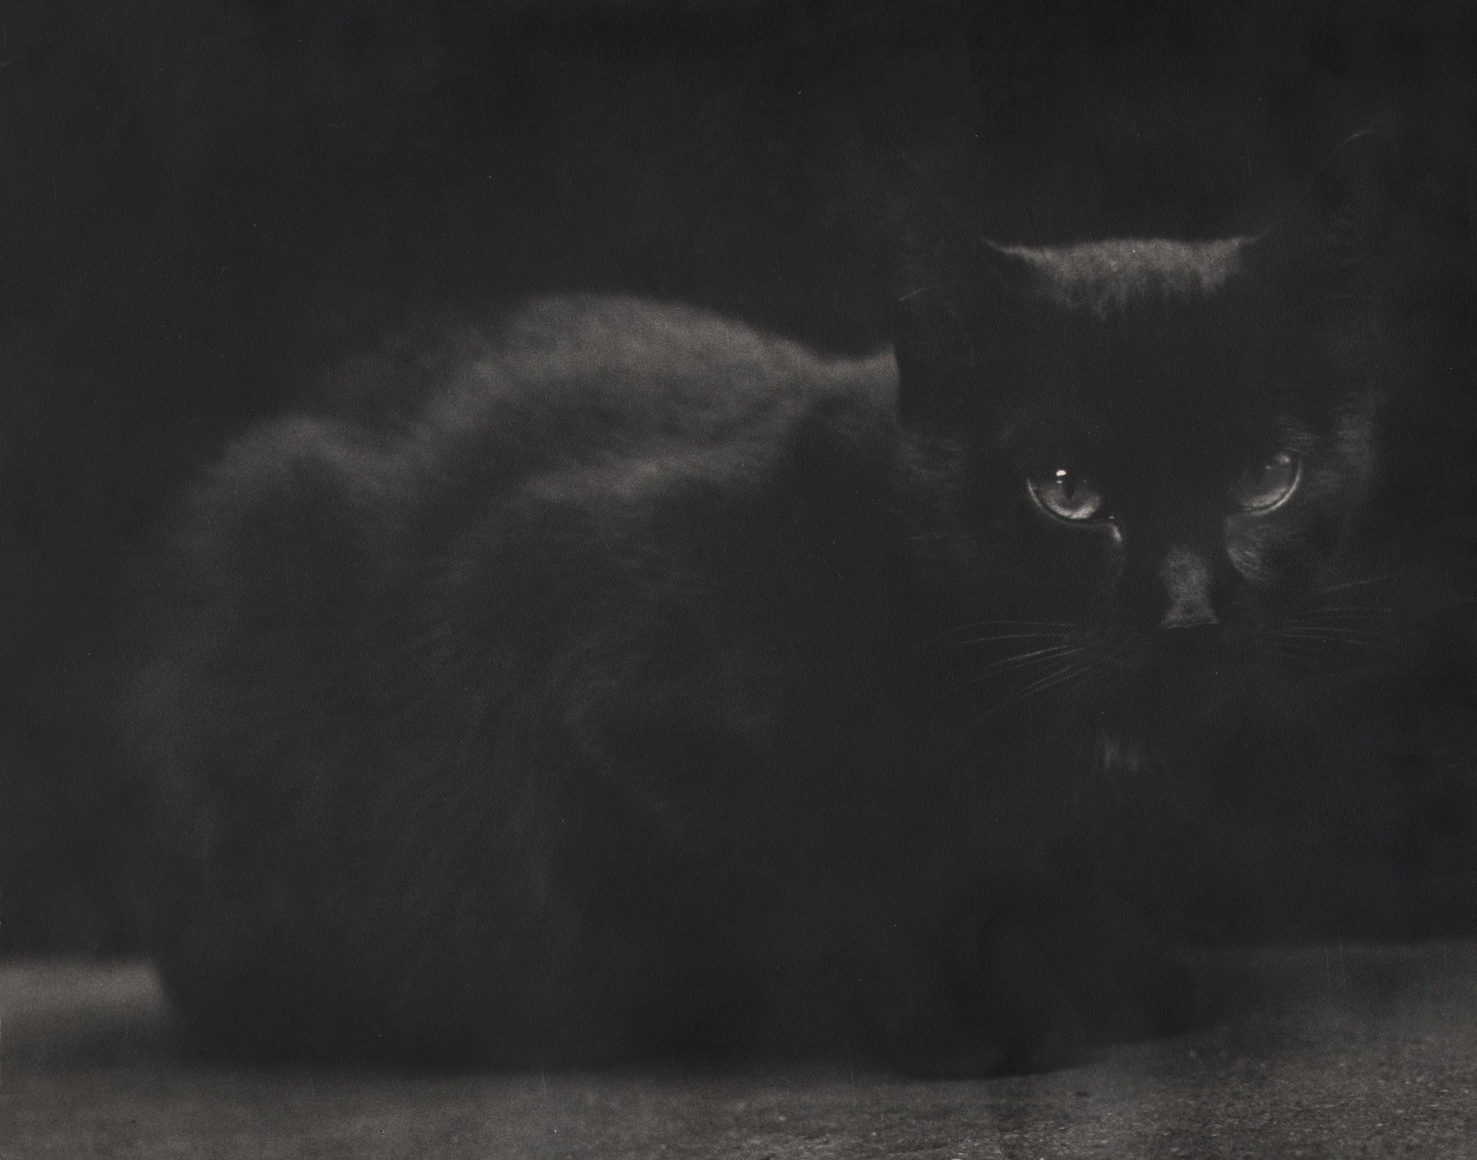 Morris H. Jaffe, Untitled, c. 1955&ndash;1960. Dark image of a black cat in a dark setting. It's eyes are in the center right of the frame.